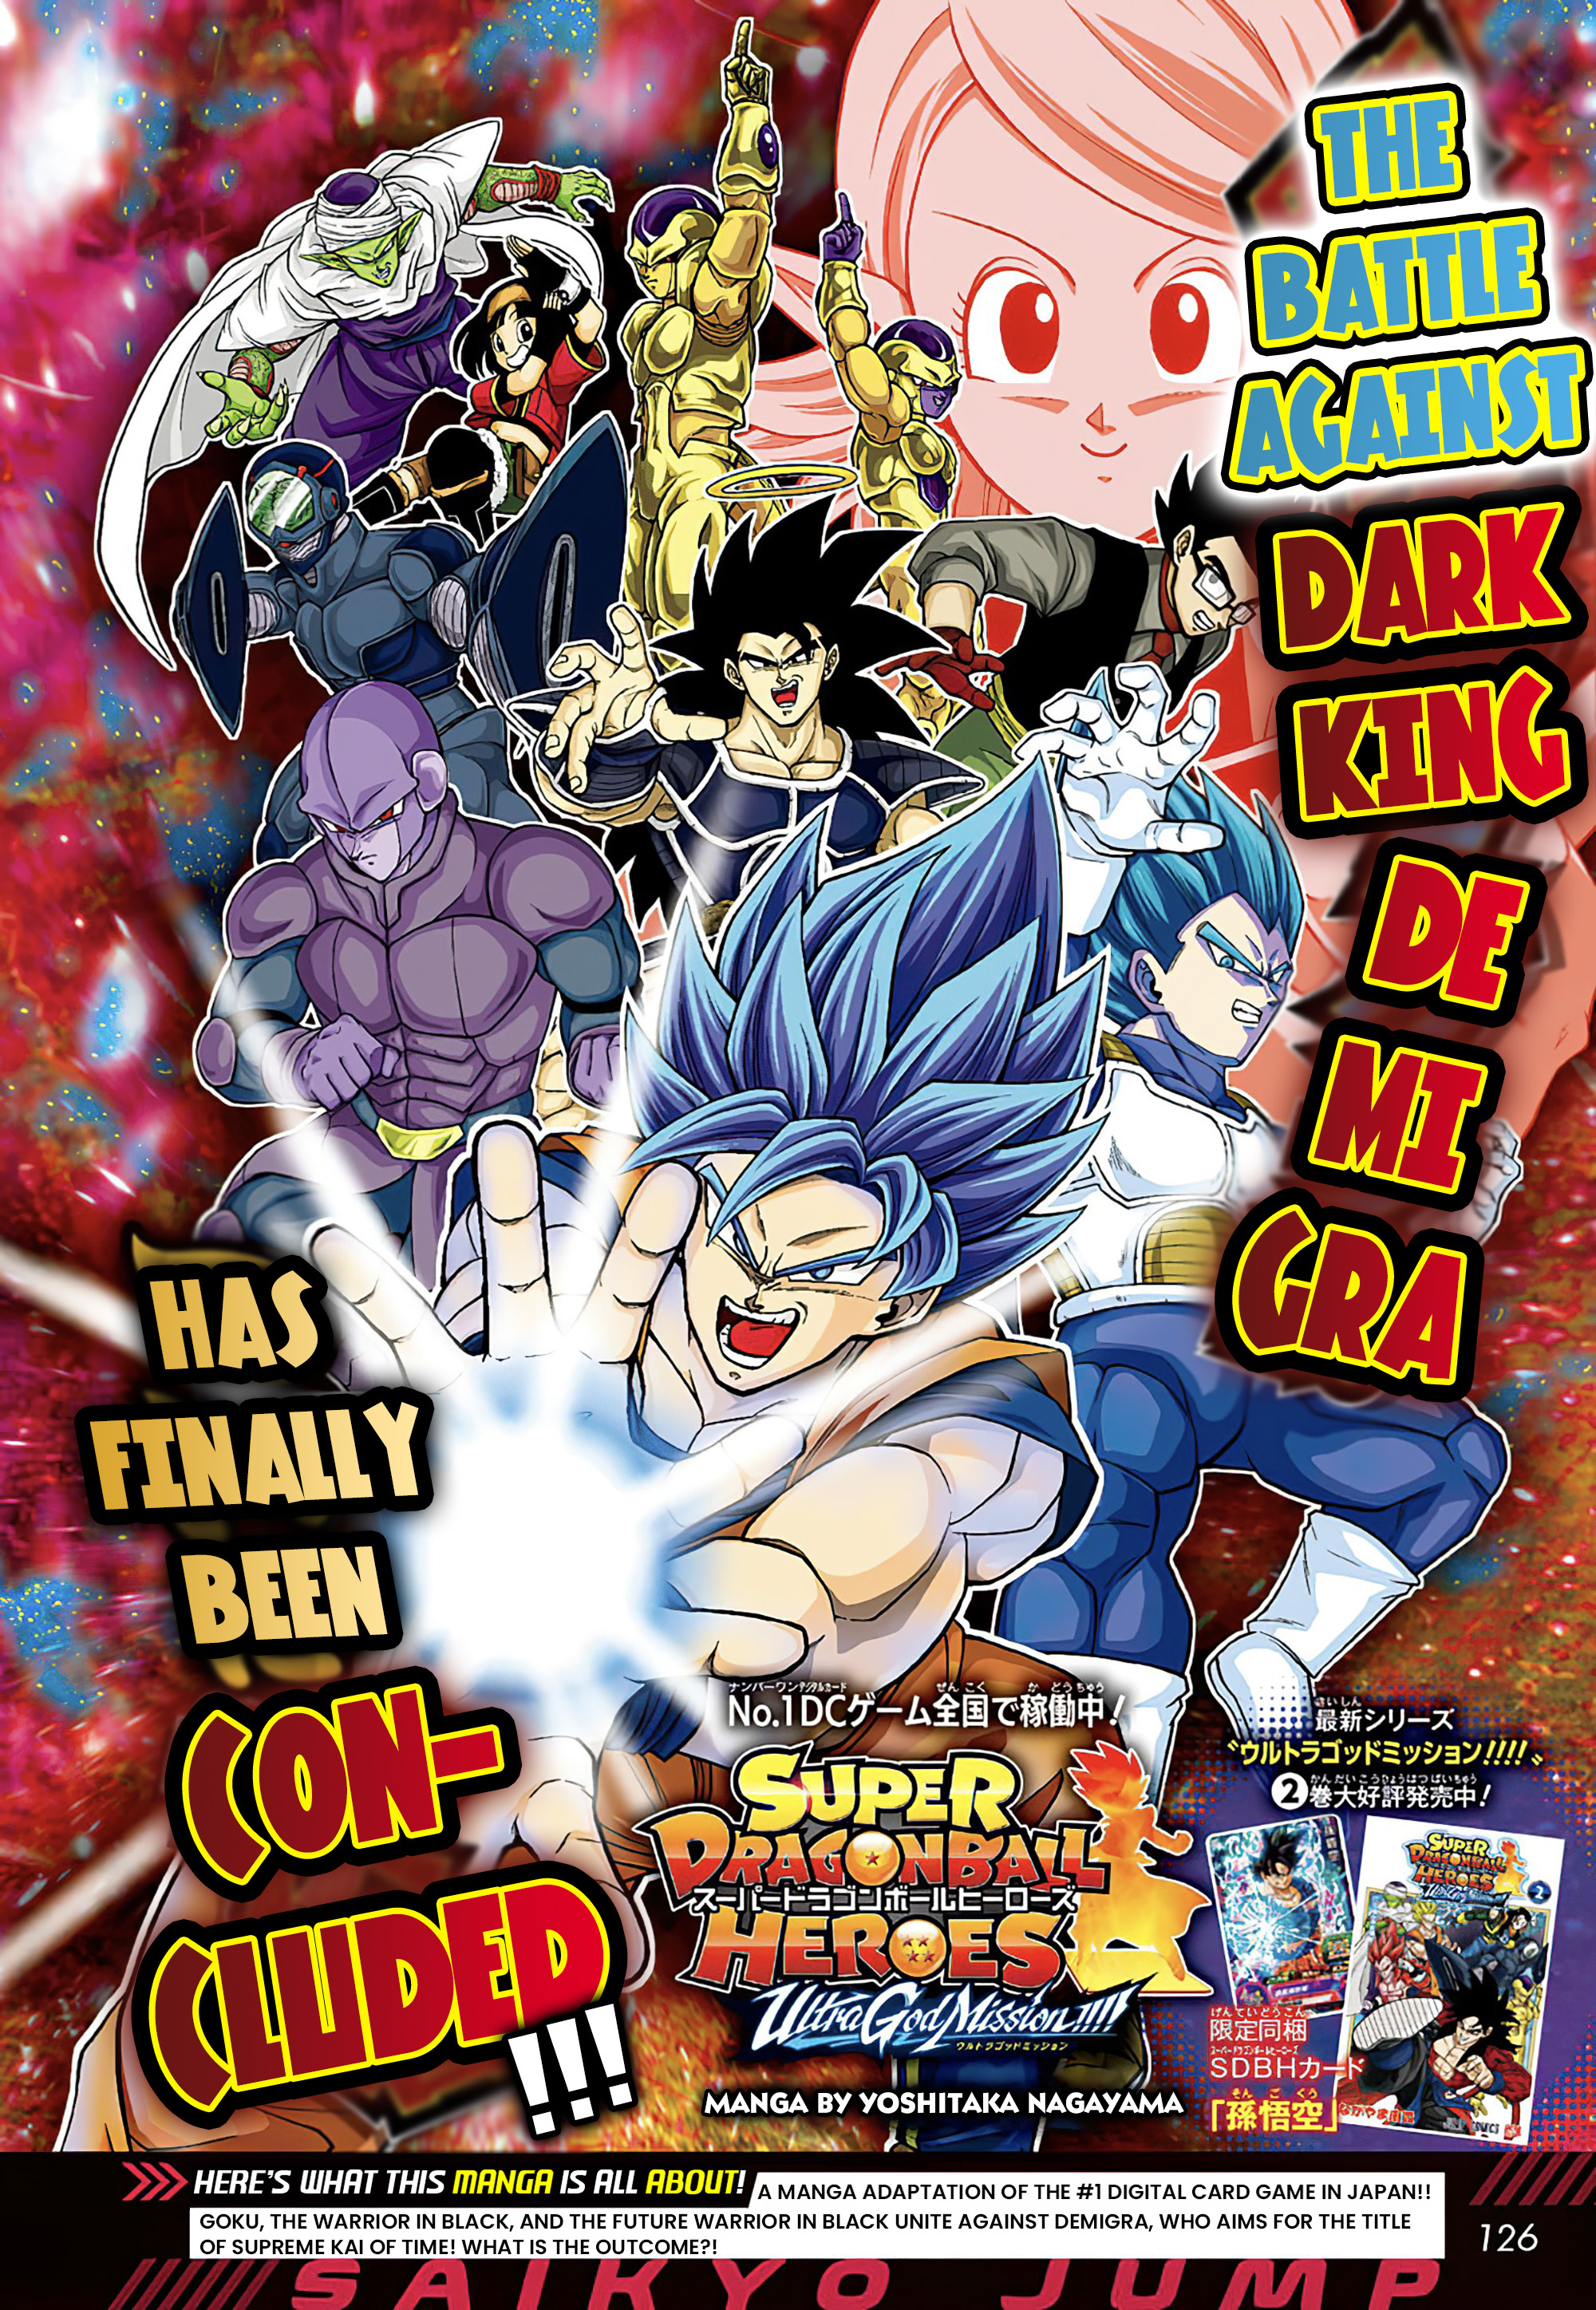 Super Dragon Ball Heroes: Ultra God Mission!!!! Vol.4 Chapter 19: The Battle Against Dark King Demigra Has Finally Been Concluded!!! - Picture 1